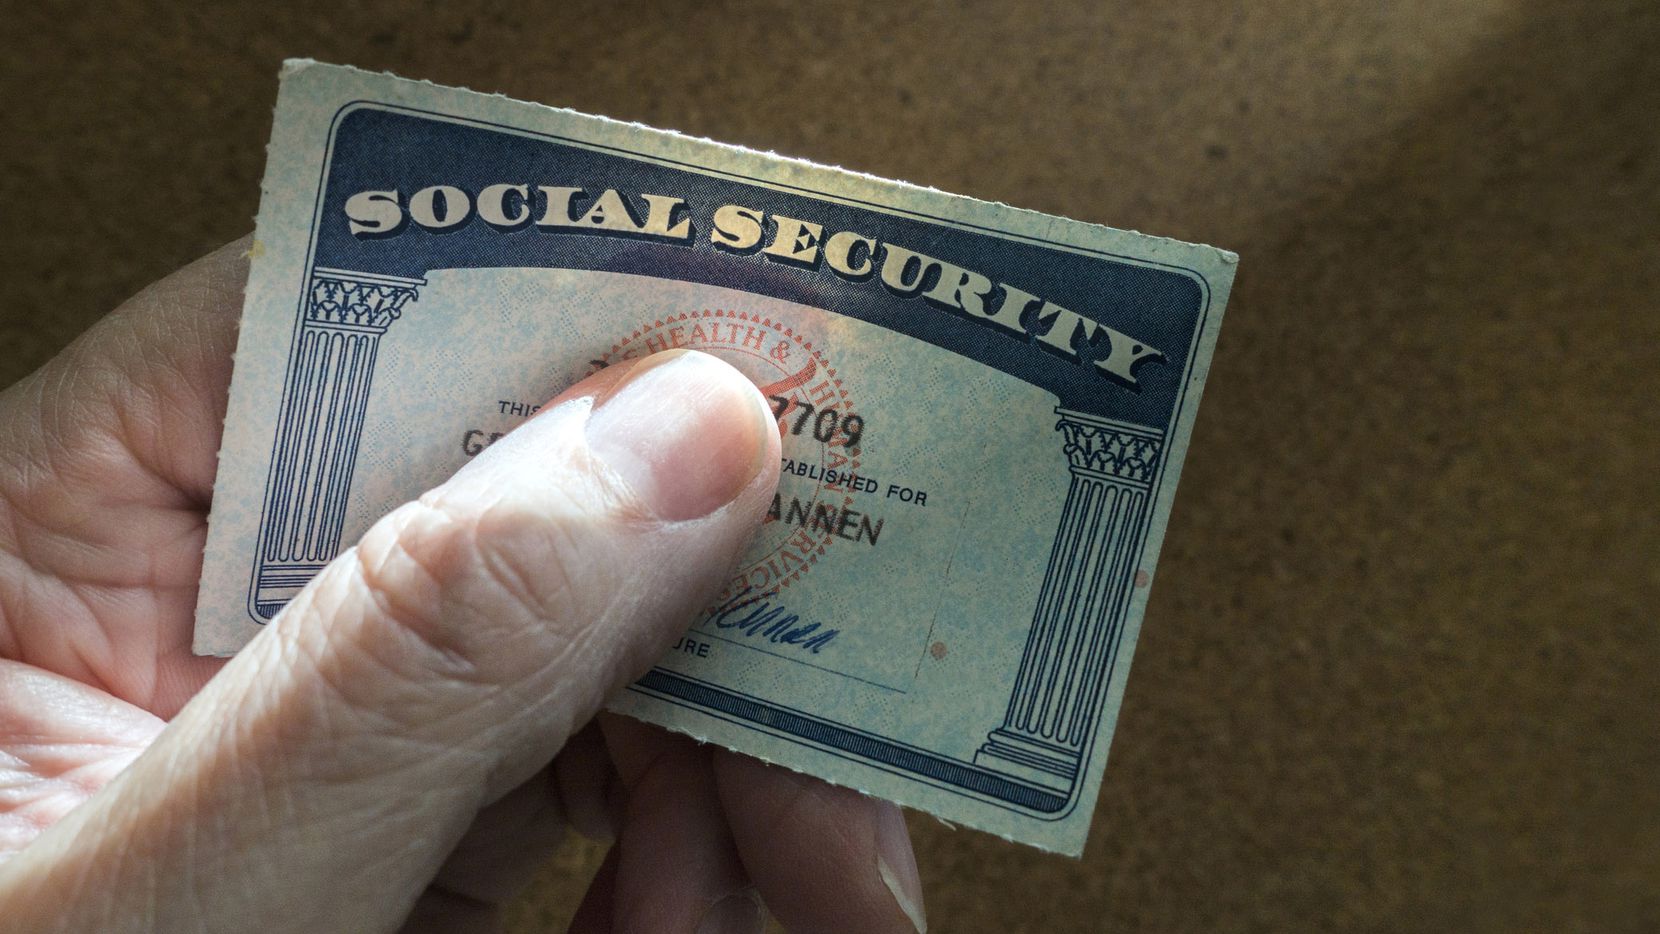 Internet lies about Social Security are often full of misspellings, run-on sentences, far...